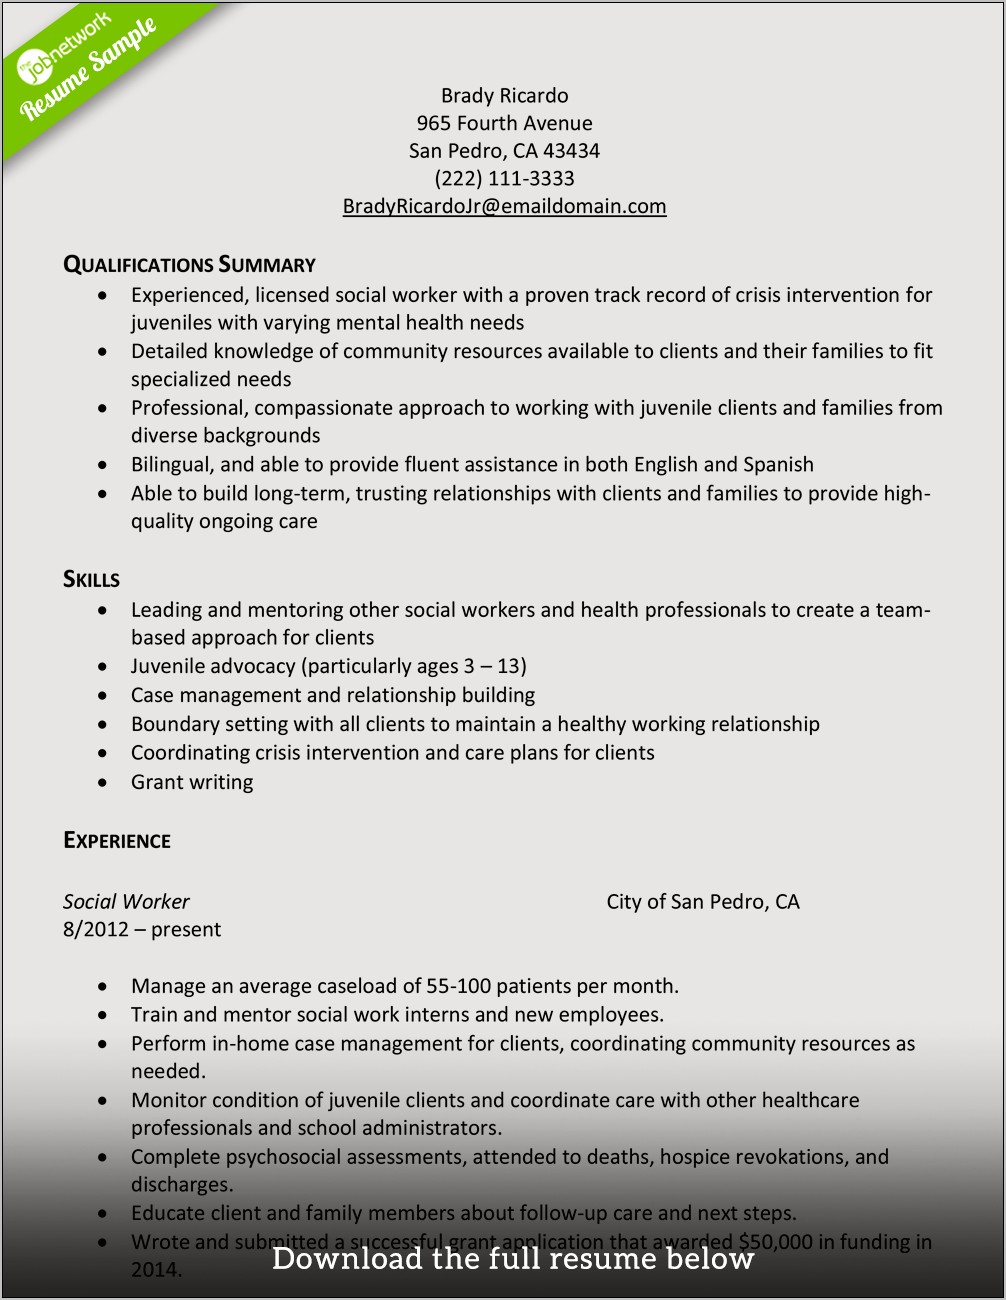 Skills To Use On Resume For Mentor